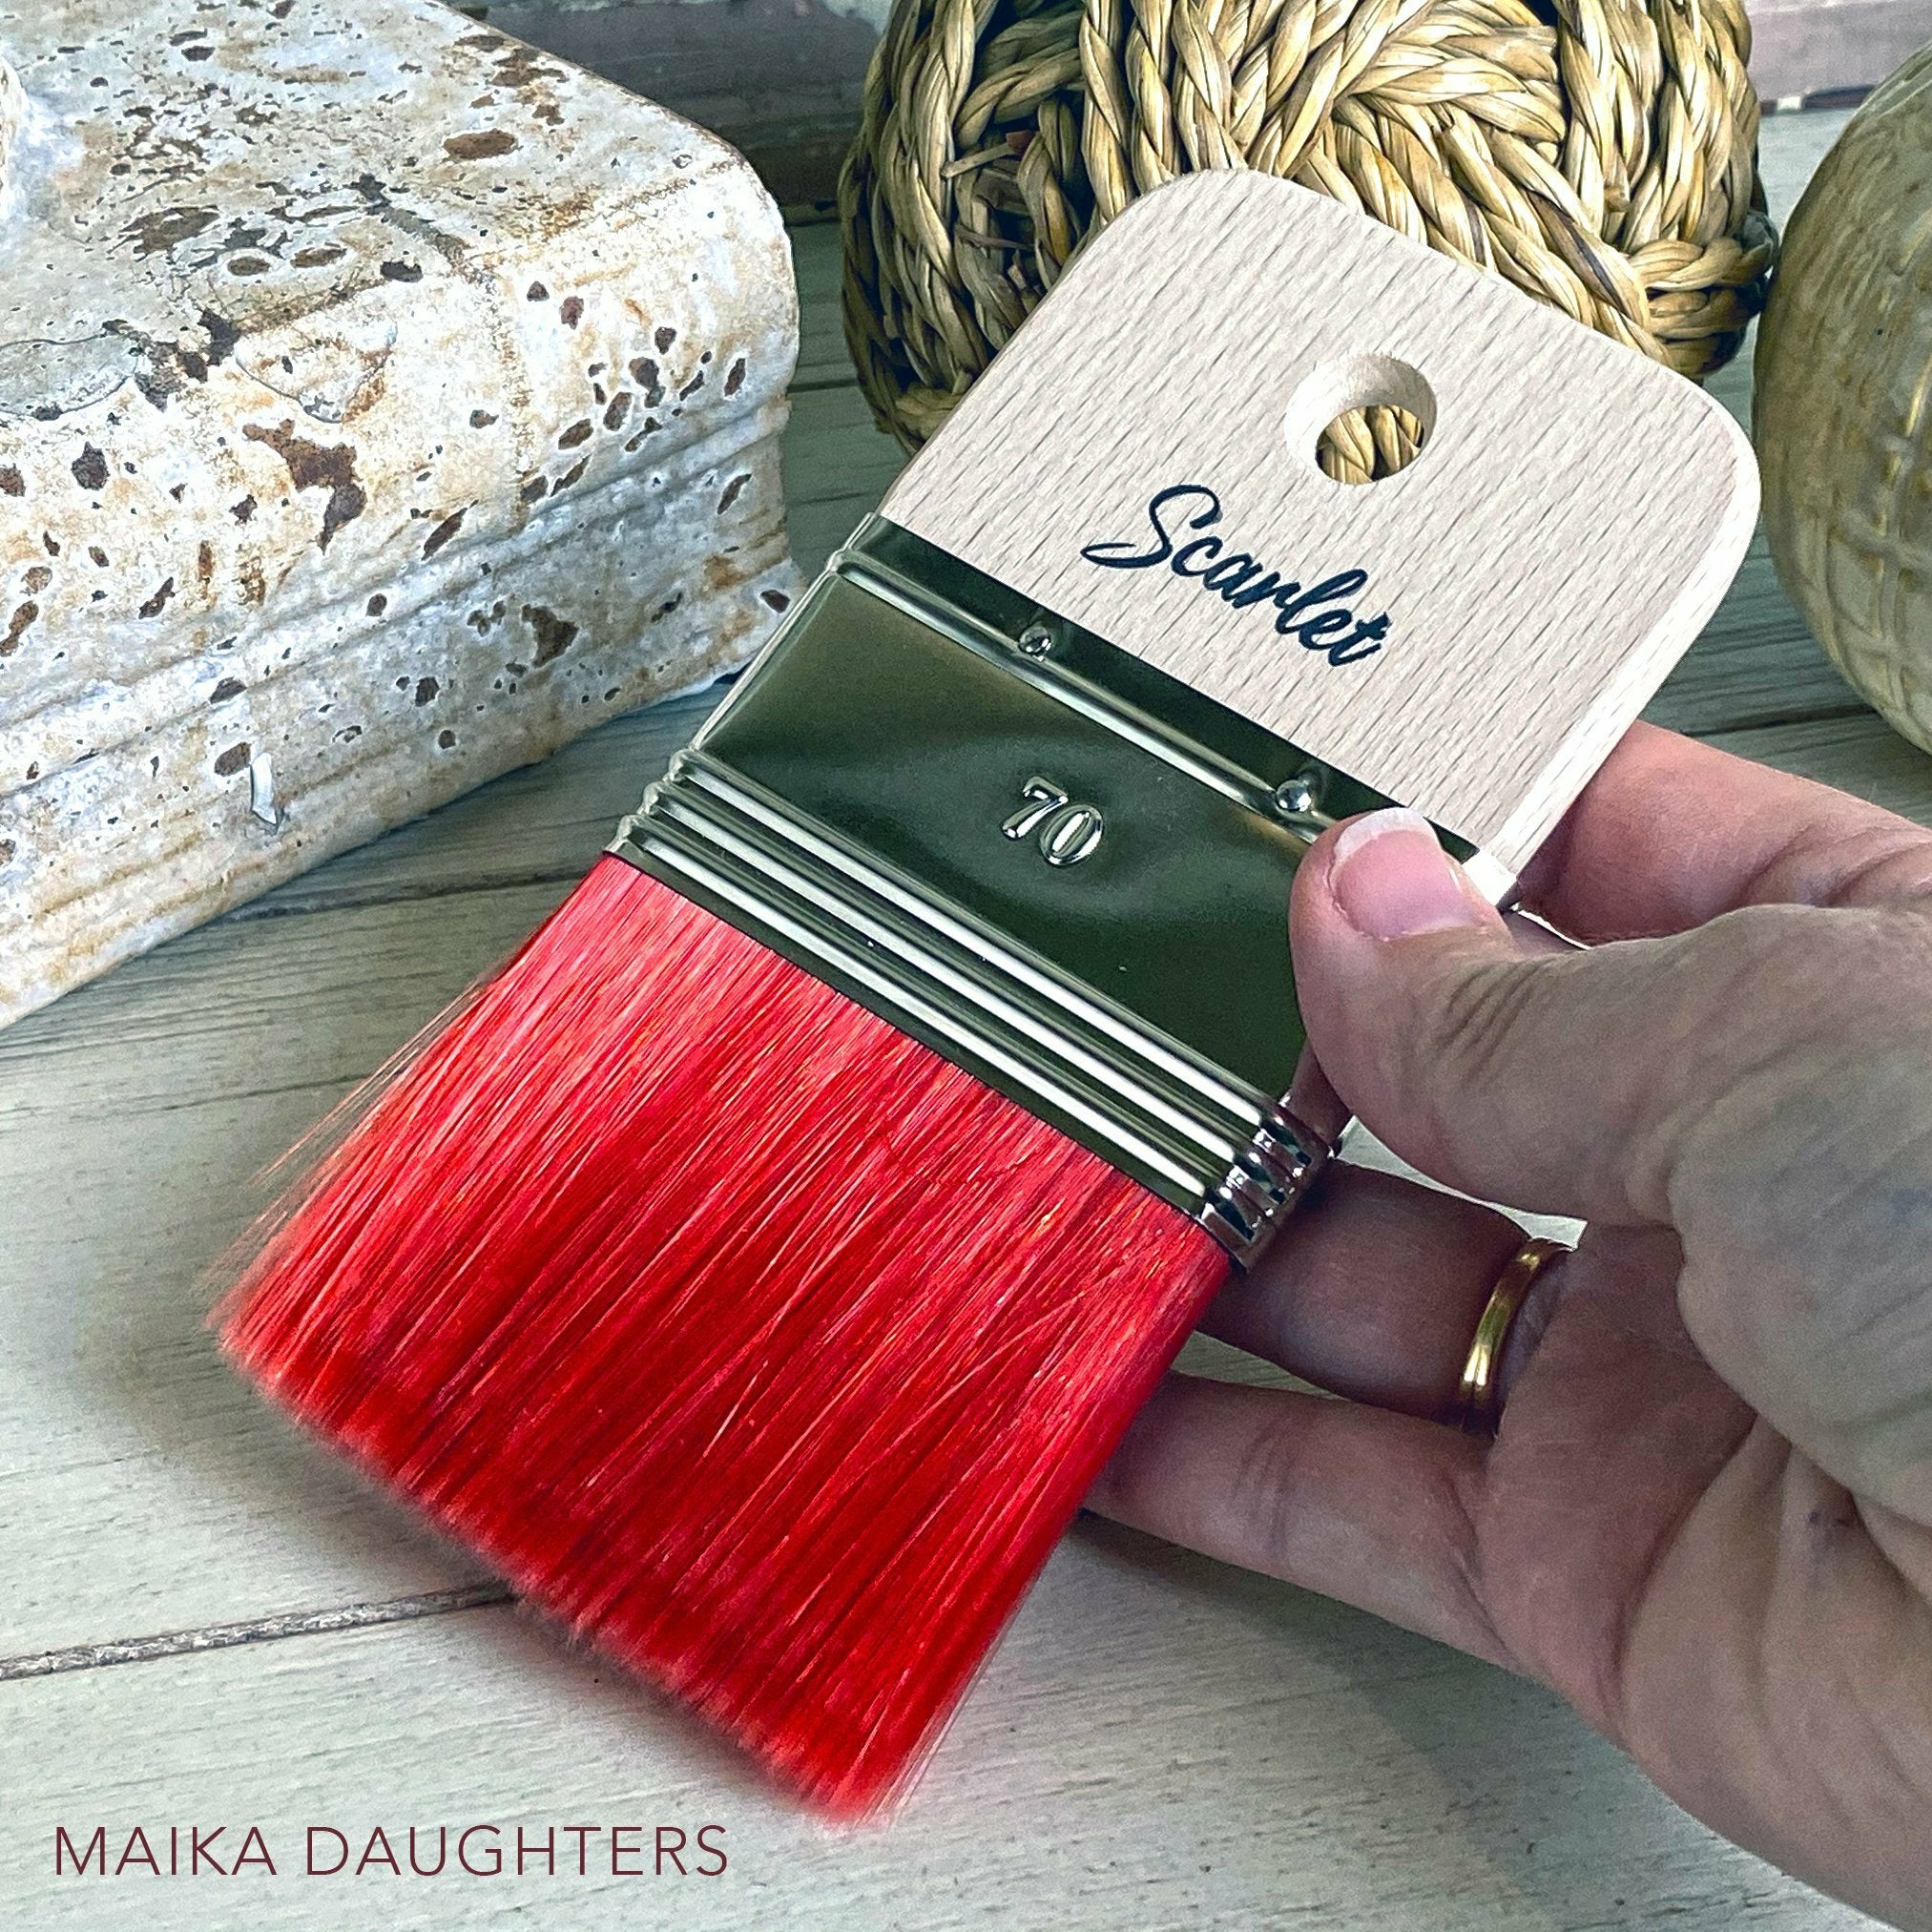 A hand holding the Scarlet Paint brush. Black text on the brush reading: Scarlet. The number 70 is below the text. A Maika Daughters logo in the bottom left.